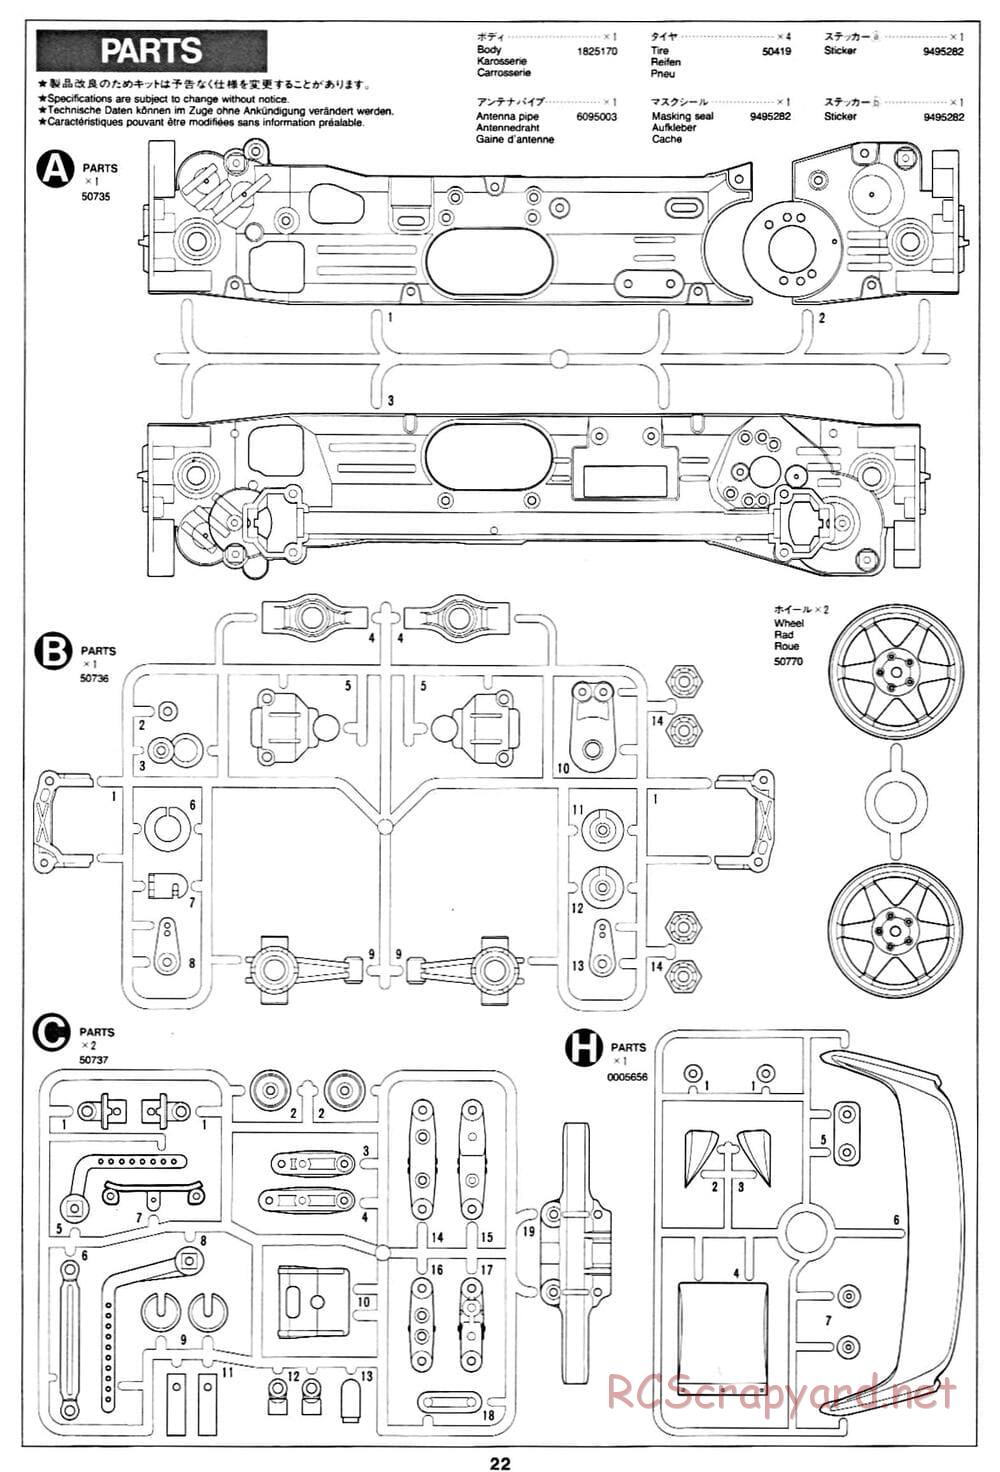 Tamiya - Toyota Celica GT-Four 97 Monte Carlo - TL-01 Chassis - Manual - Page 22